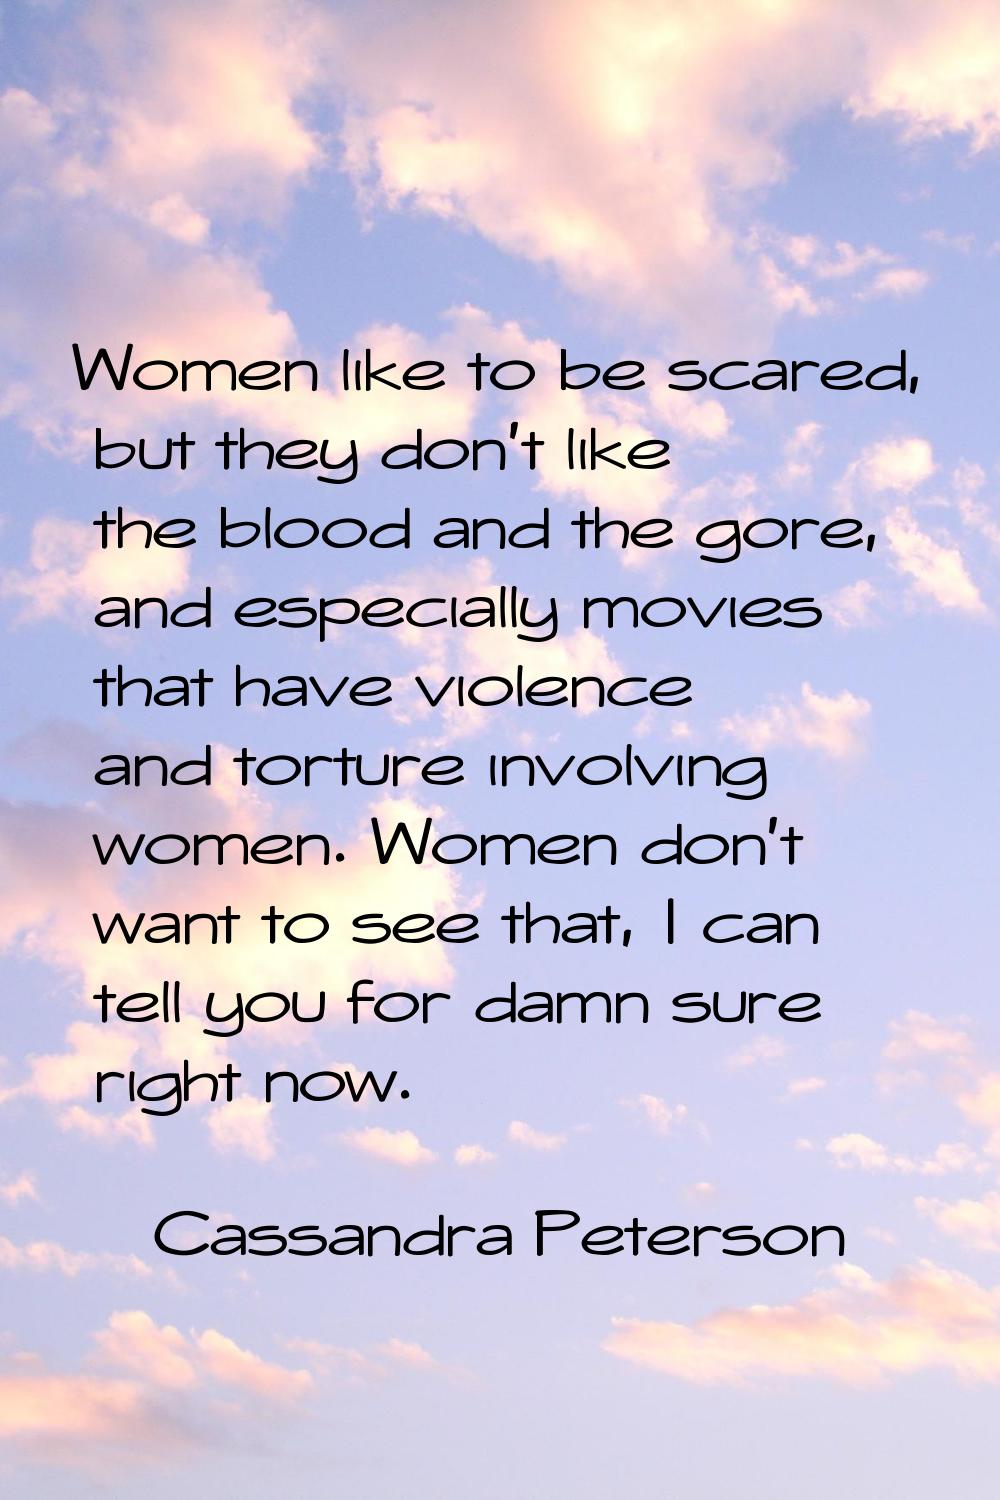 Women like to be scared, but they don't like the blood and the gore, and especially movies that hav